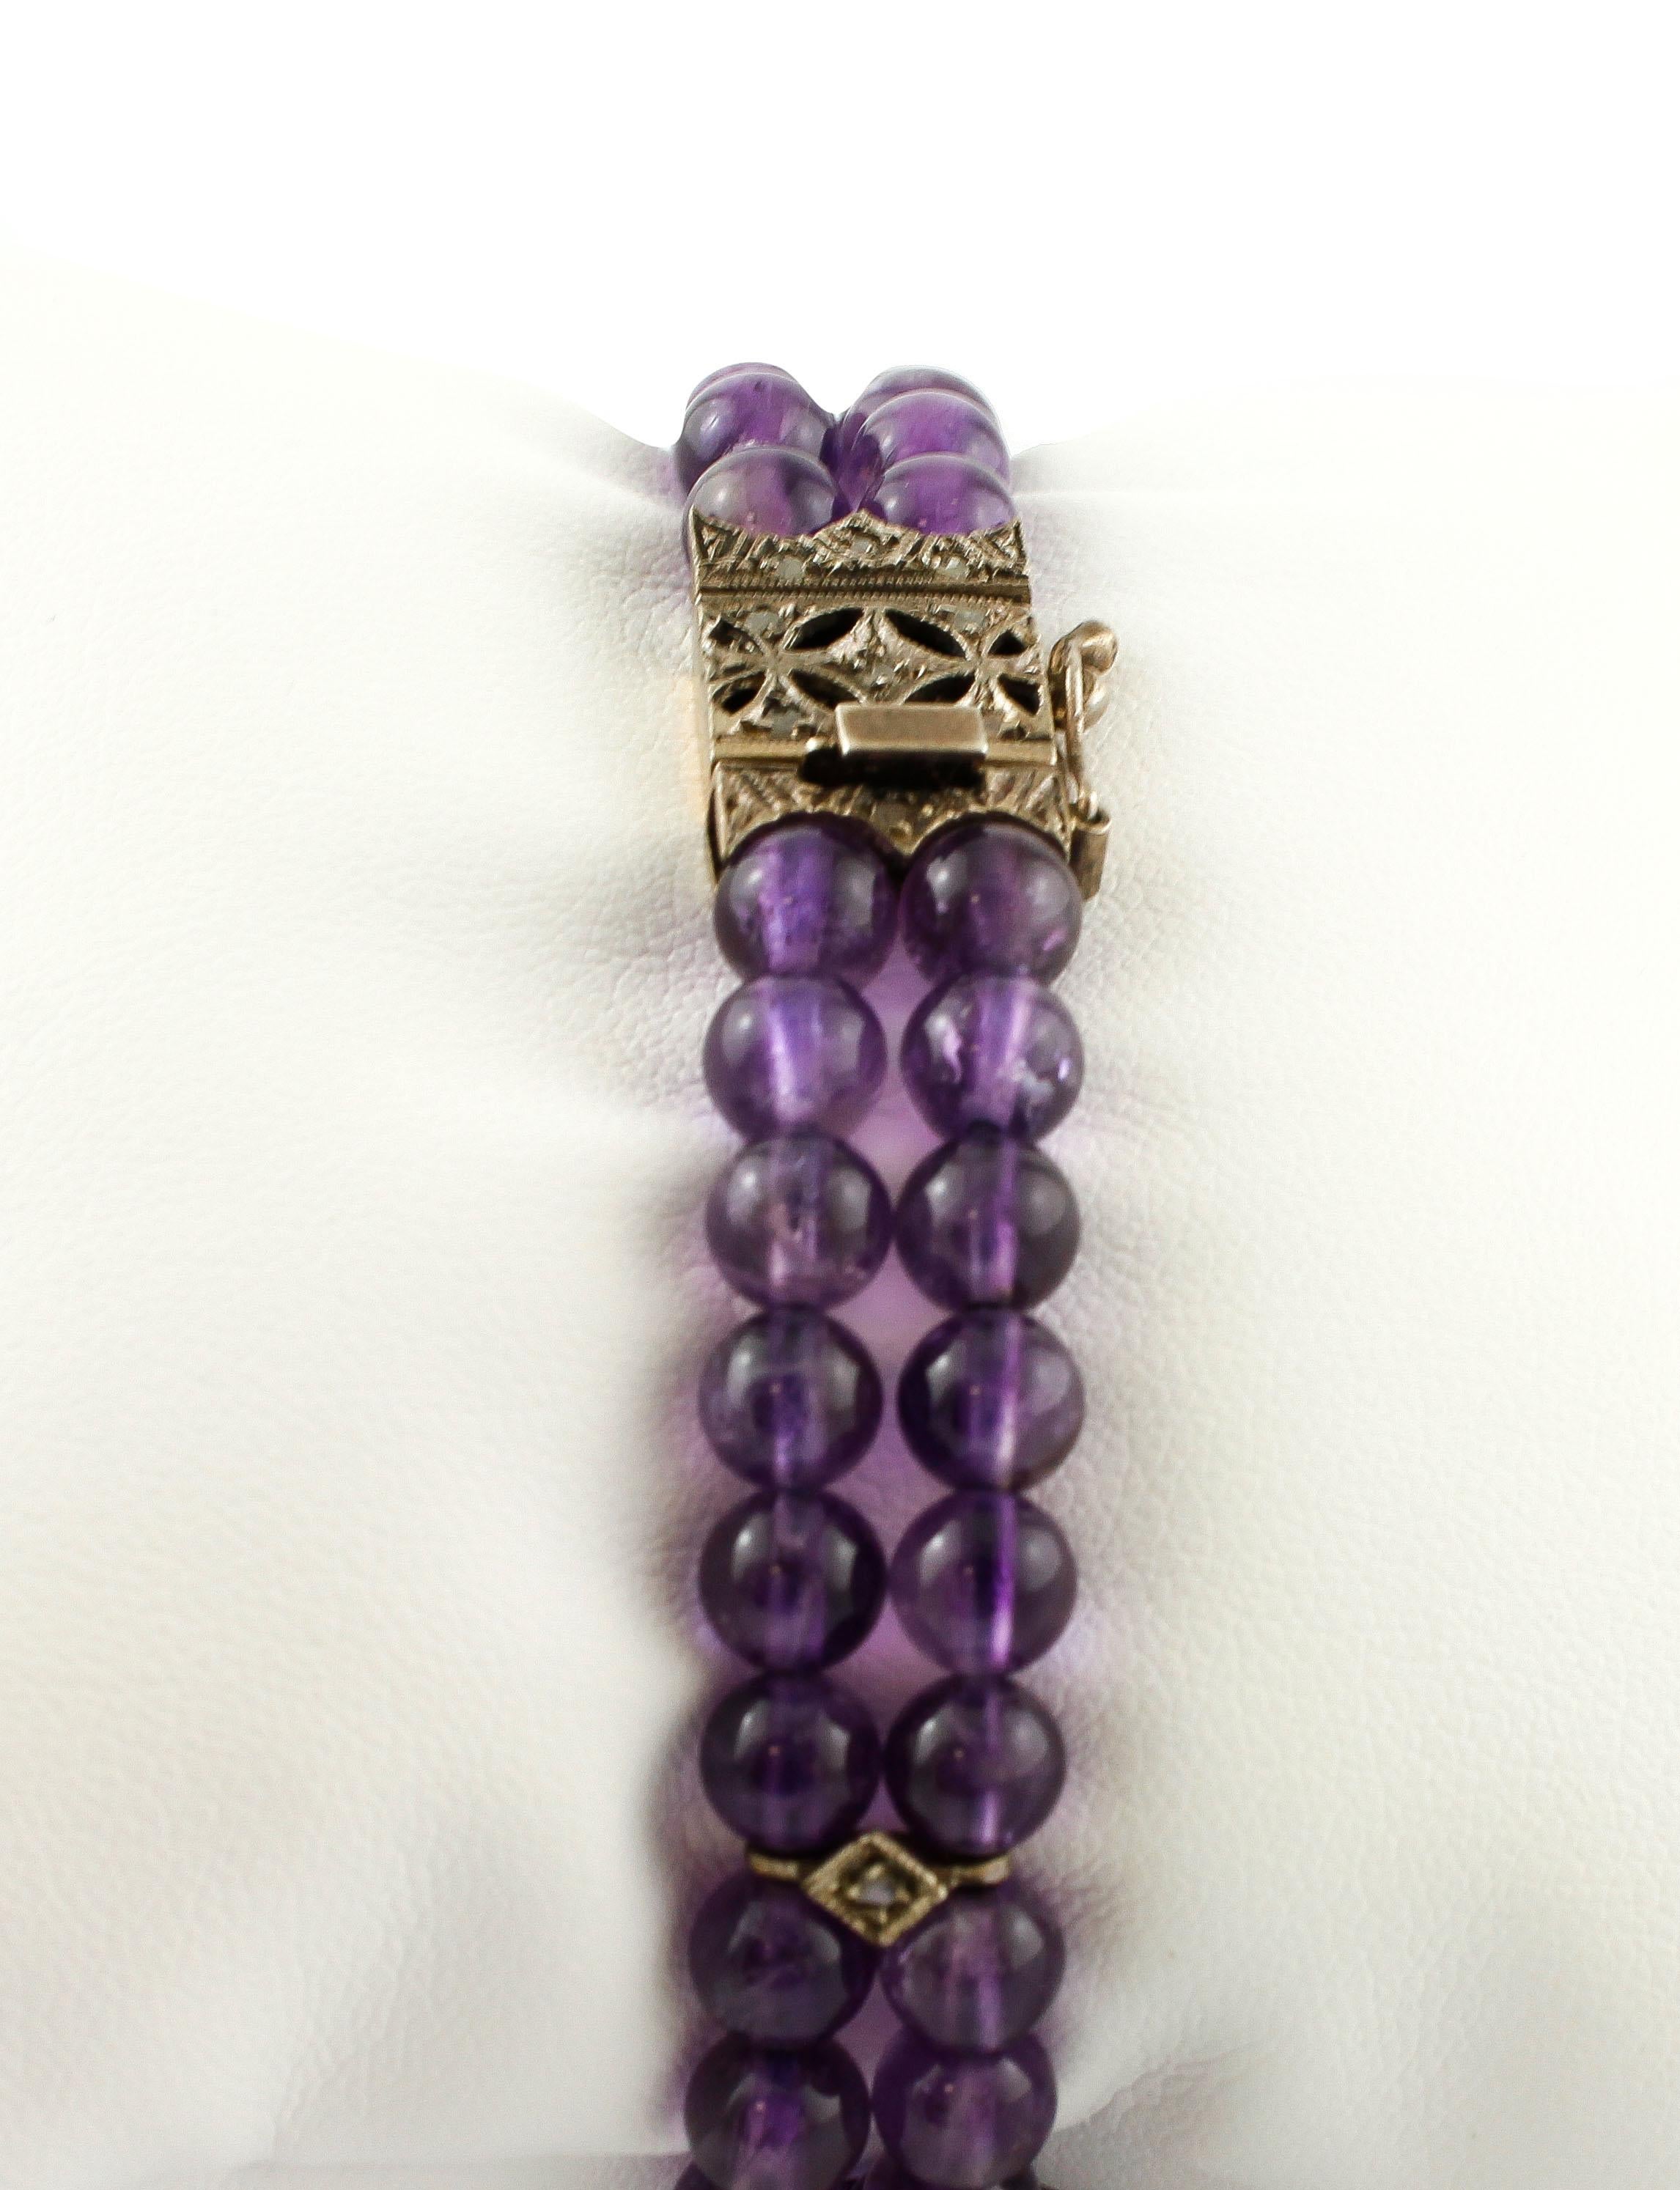 Beautiful retro beaded bracelet formed by 2 rows of amethysts sphere with little decorations in silver and diamonds, and a simple closure in 9k rose gold and silver studded with diamonds. 
The origin of this bracelet dates back to the 1950' and it